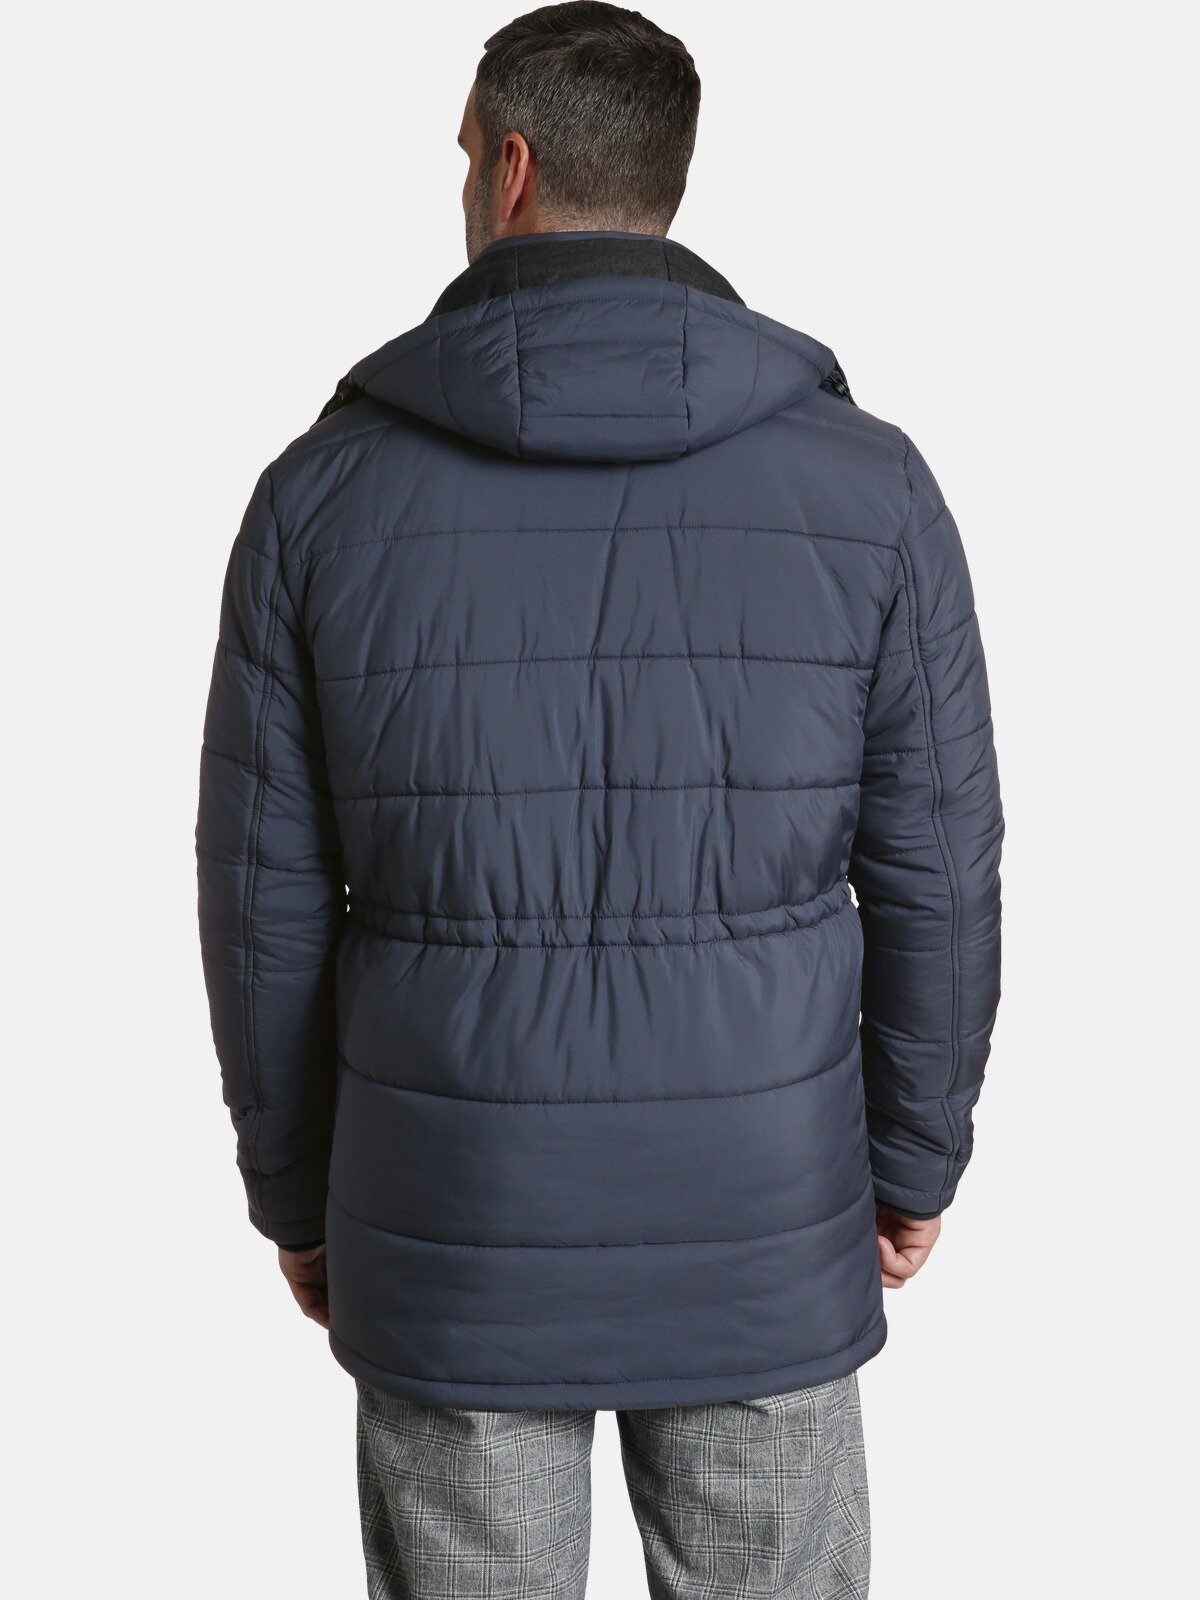 Outdoorjacke abnehmbare Winterjacke, SIR Colby Charles Kapuze HORACE